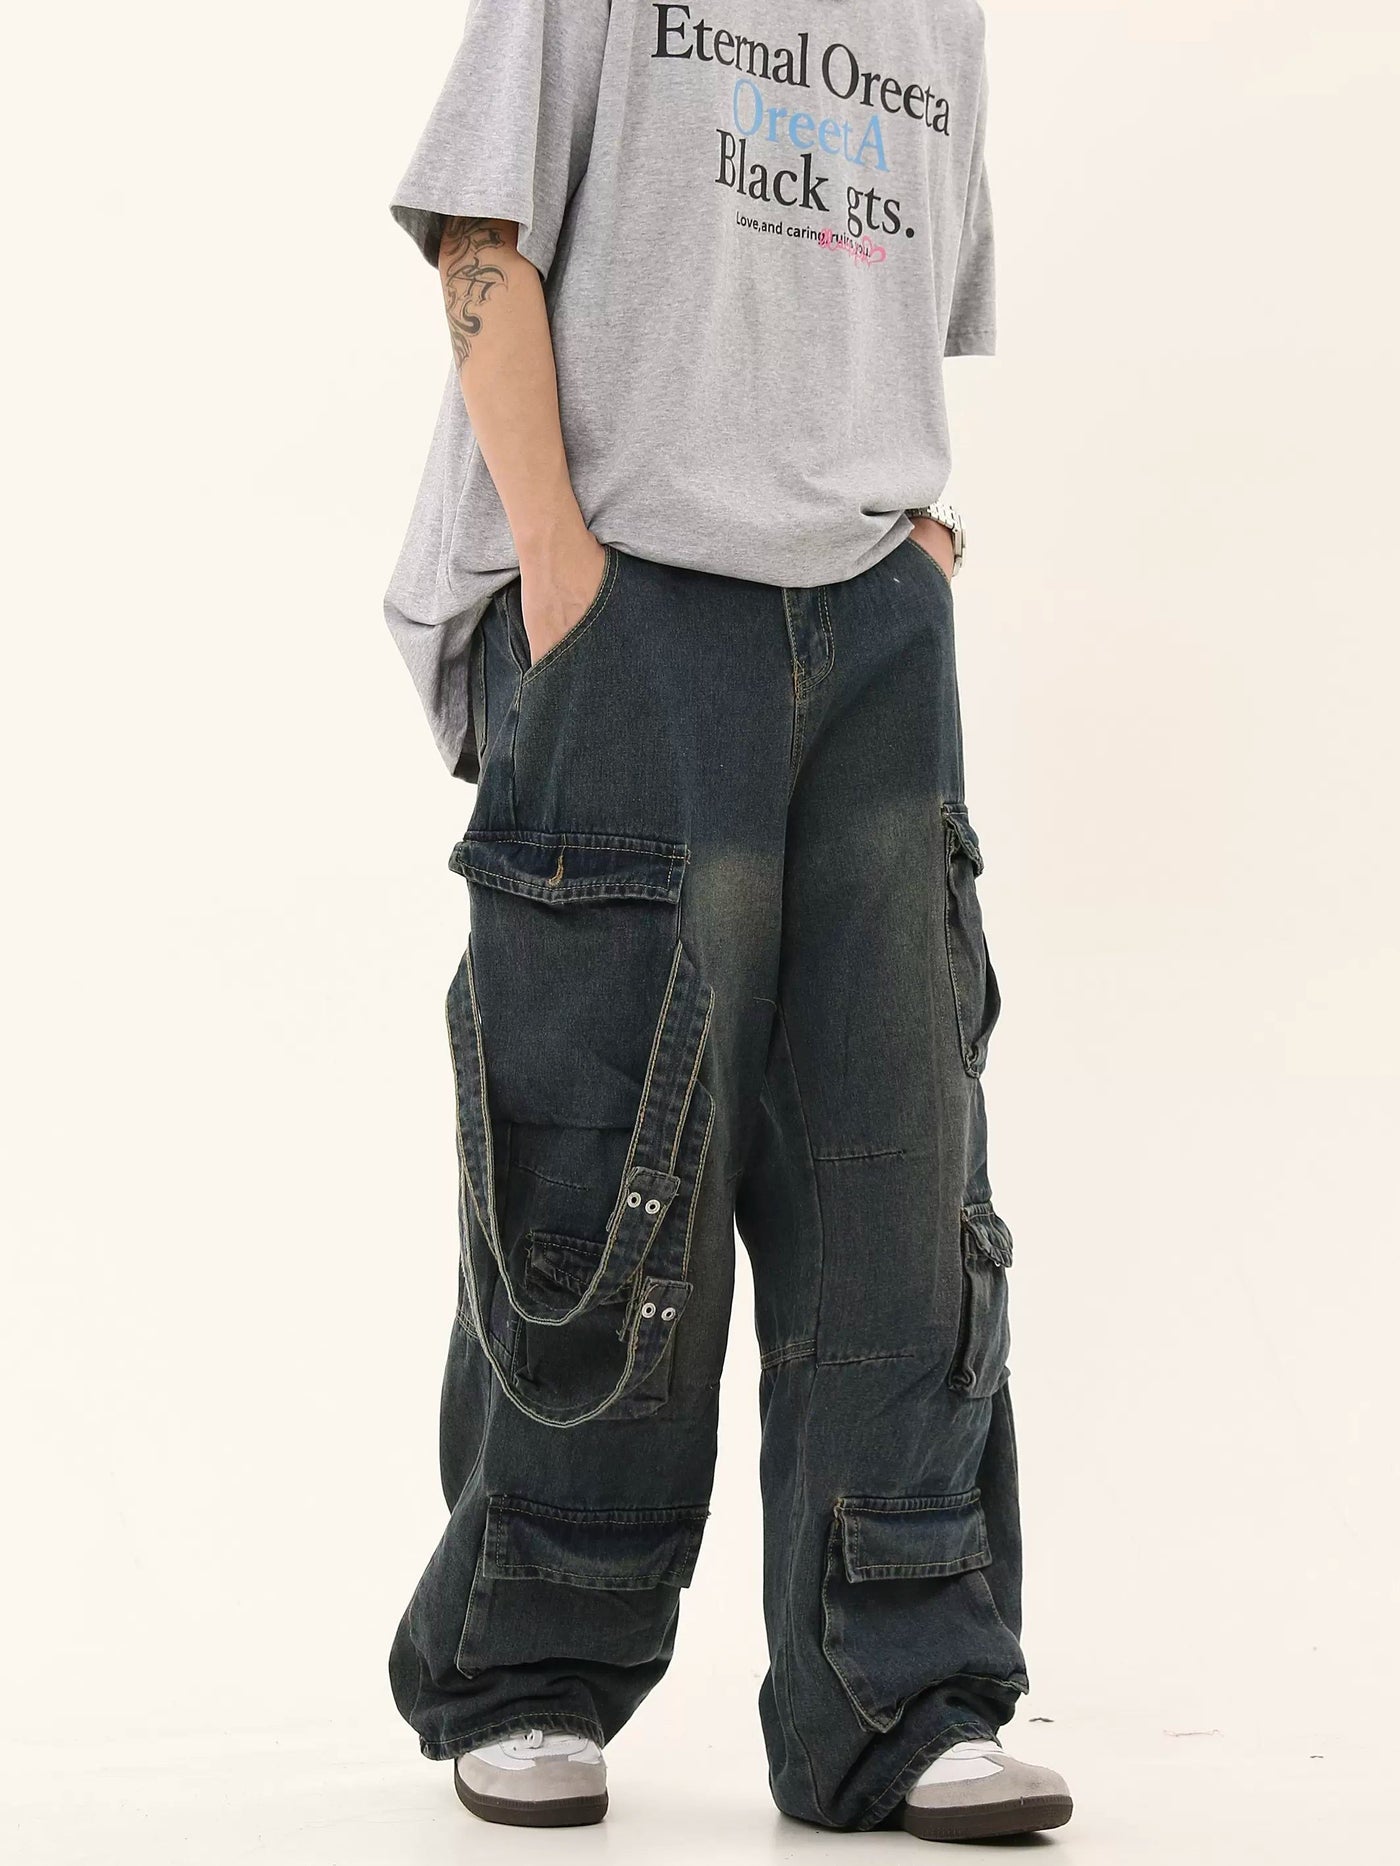 Asymmetric Strap Washed Cargo Jeans Korean Street Fashion Jeans By Blacklists Shop Online at OH Vault